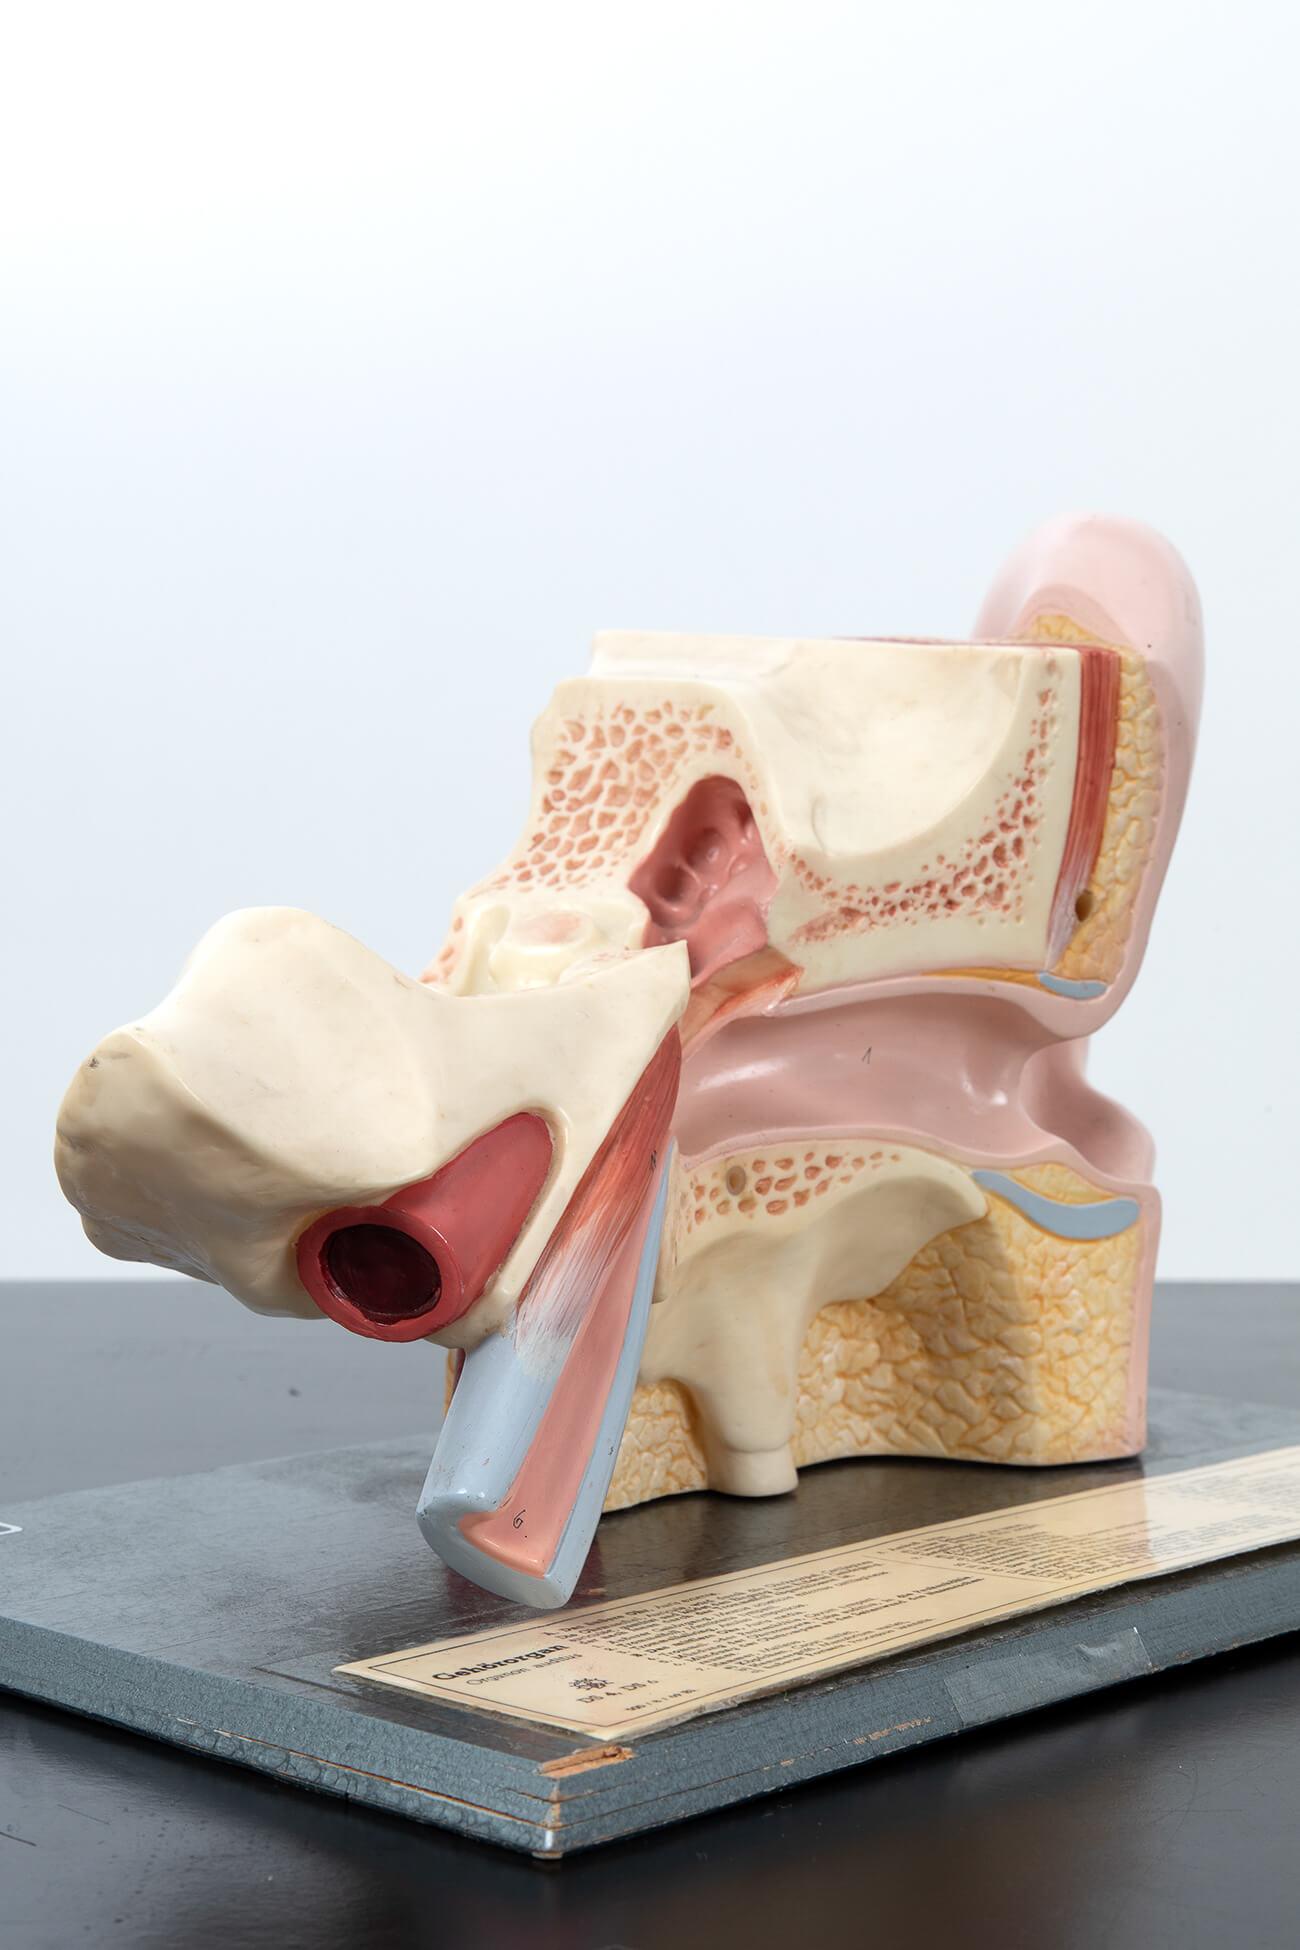 The DS5 Somso model of the human ear with hand-painted detailing to both the inner and outer ear.

These models are the most detailed and accurate of any anatomical models available, sought after by educators, medical professionals, artists, and